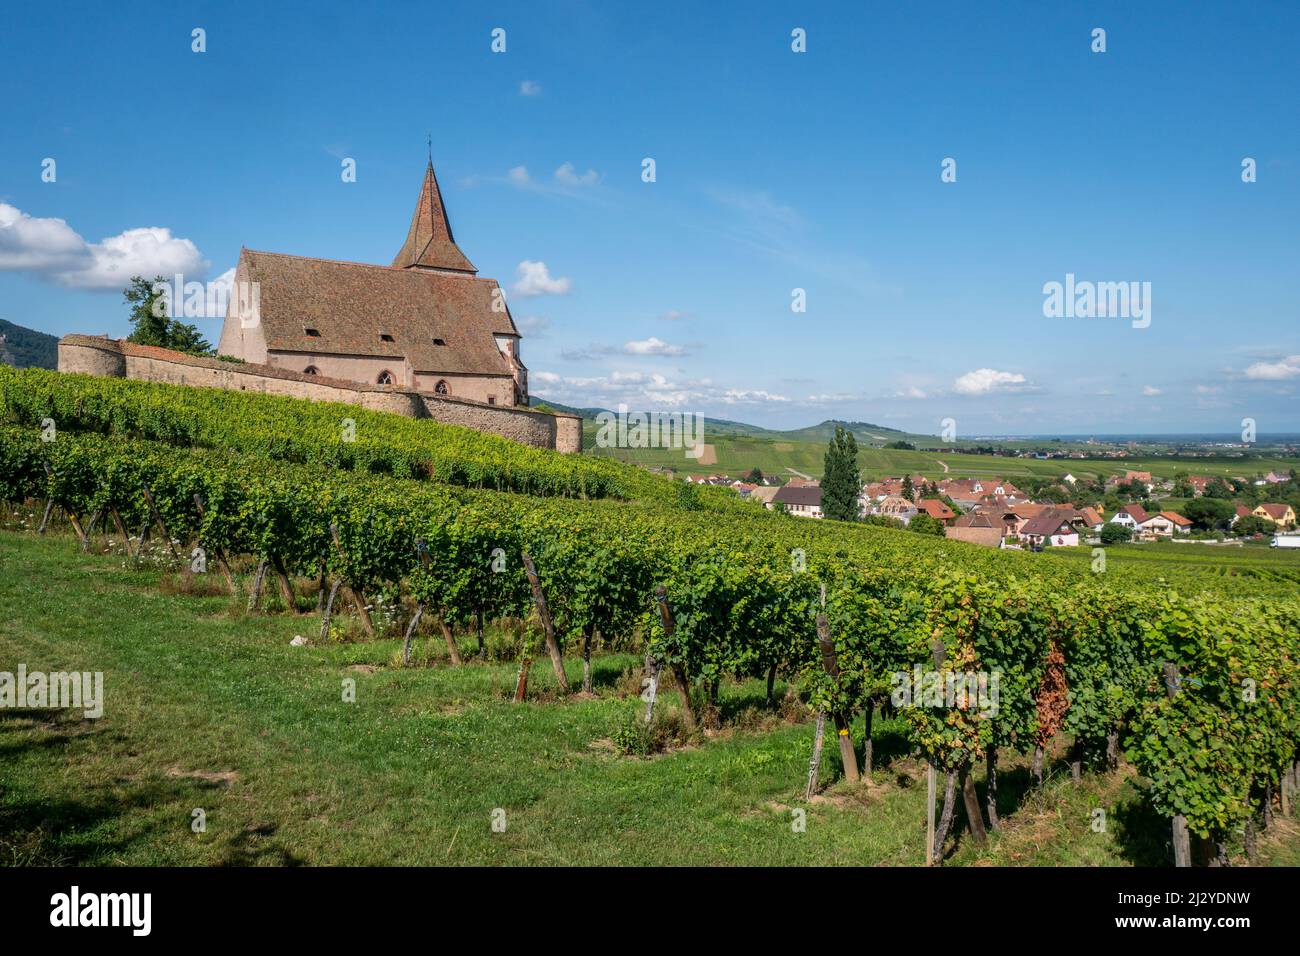 Church in the vineyards, Gothic fortified church Saint-Jacques, Hunawihr, Haut-Rhin, Alsace Wine Route, Alsace, France, Europe Stock Photo